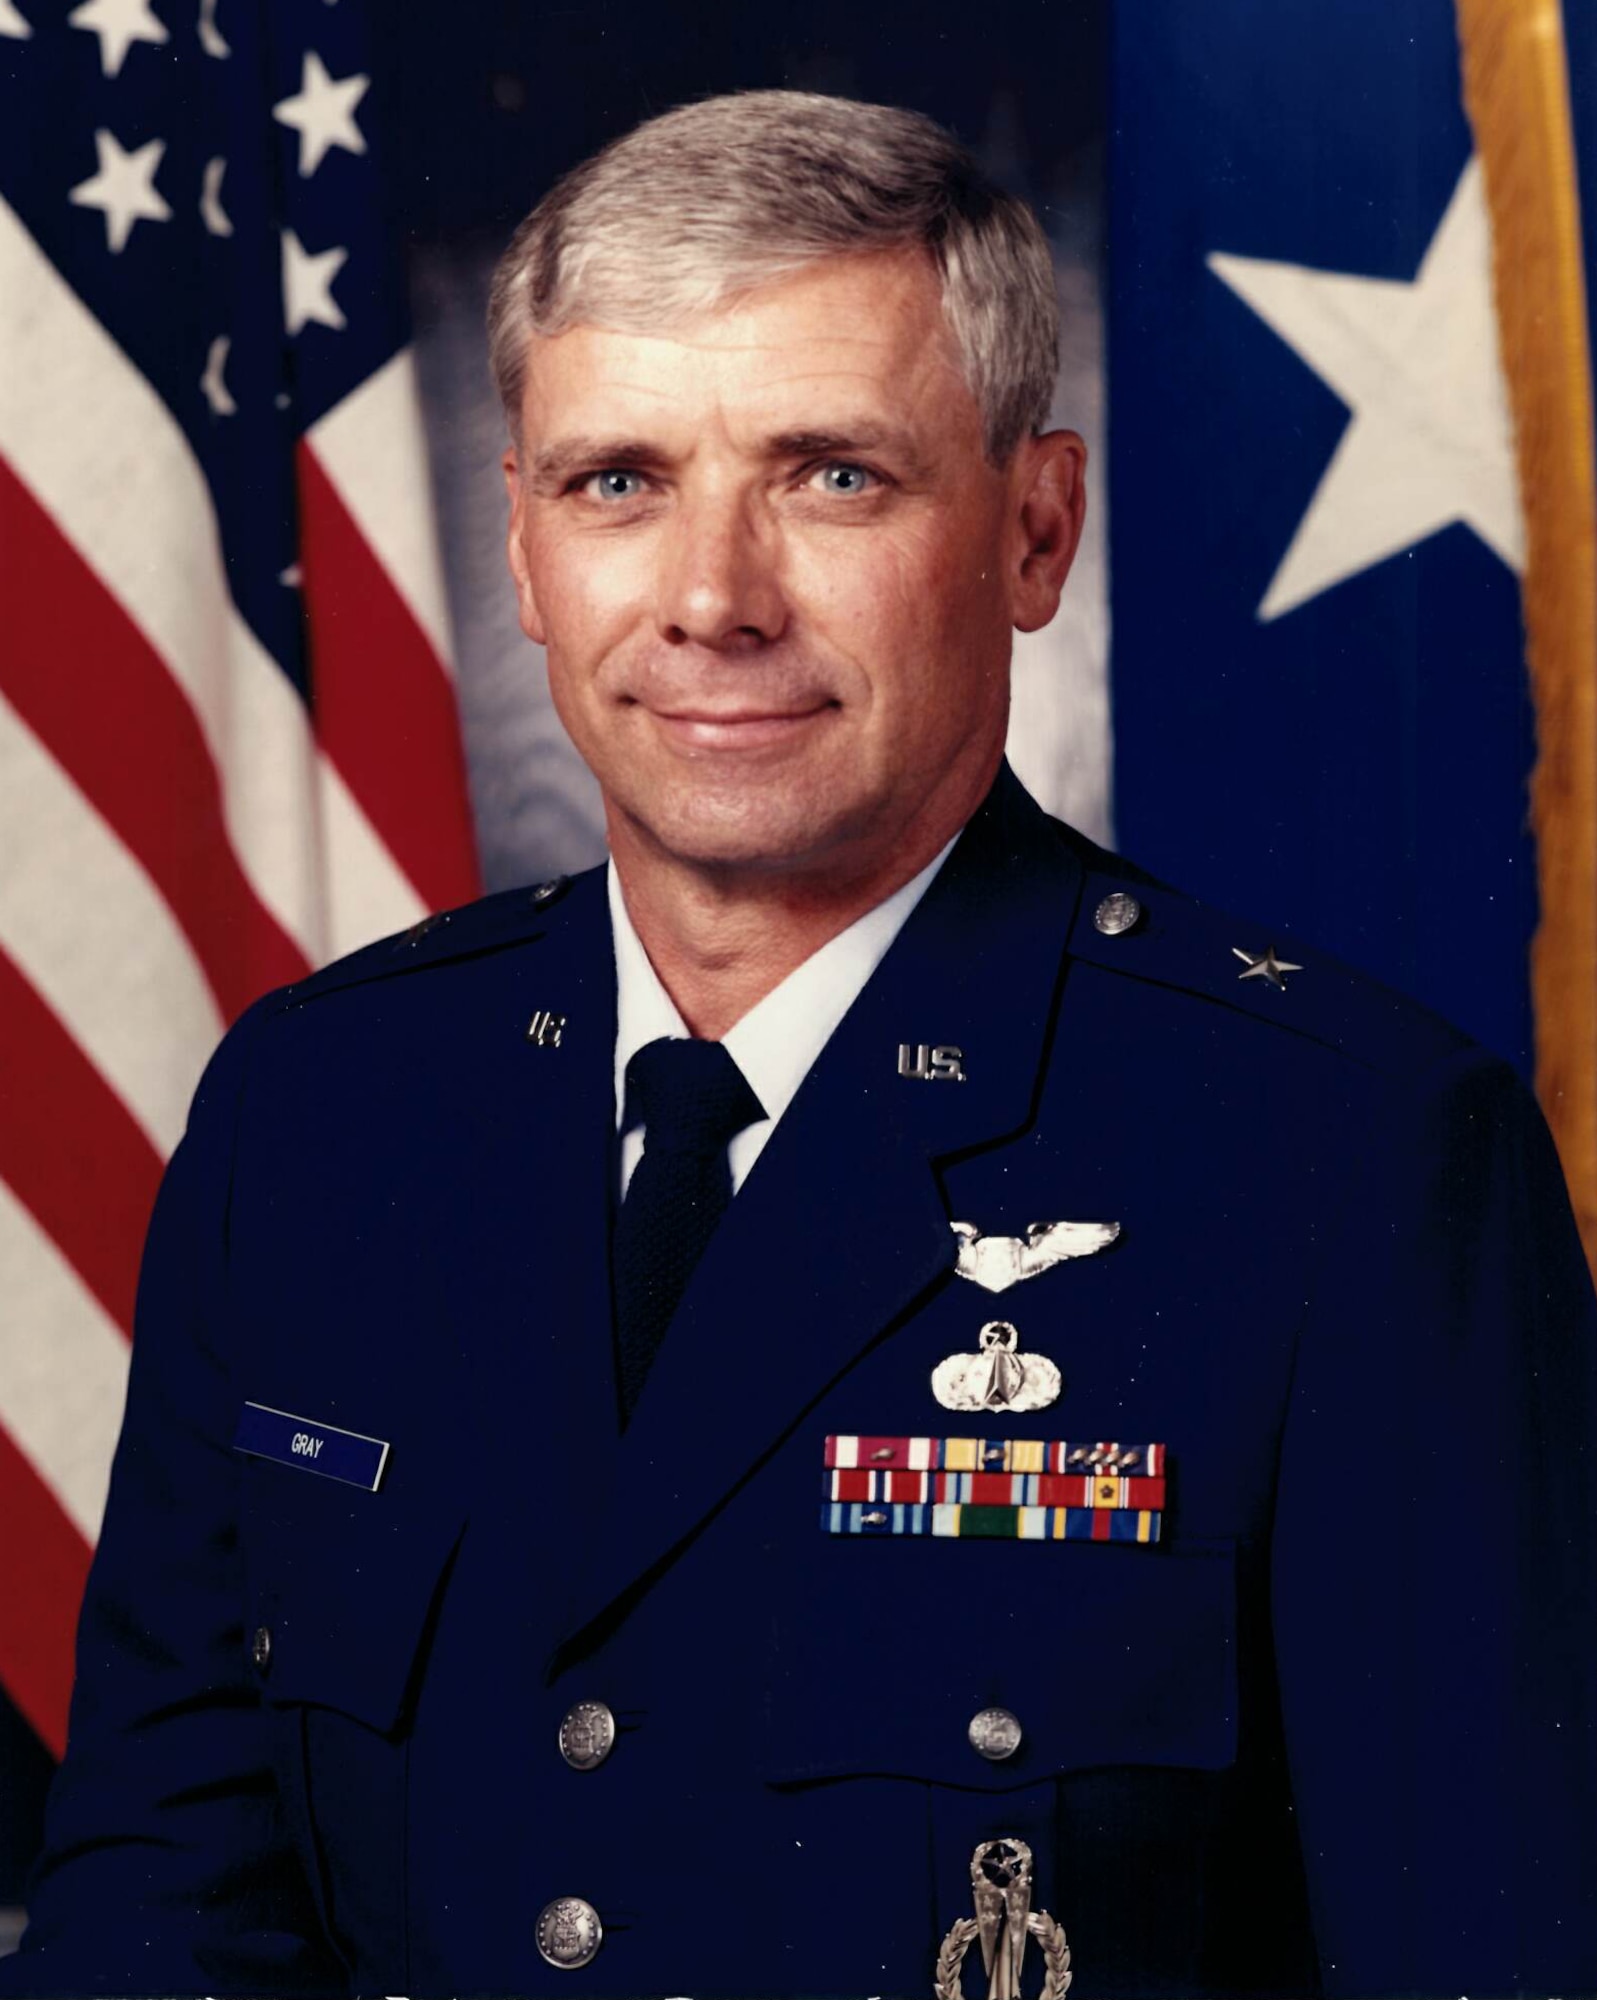 Retired Brig. Gen. Ronald Gray was the first commander of the 21st Space Wing from May 1992 to August 1993. The wing celebrated its 21st anniversary May 15, 2013. (U.S. Air Force photo)